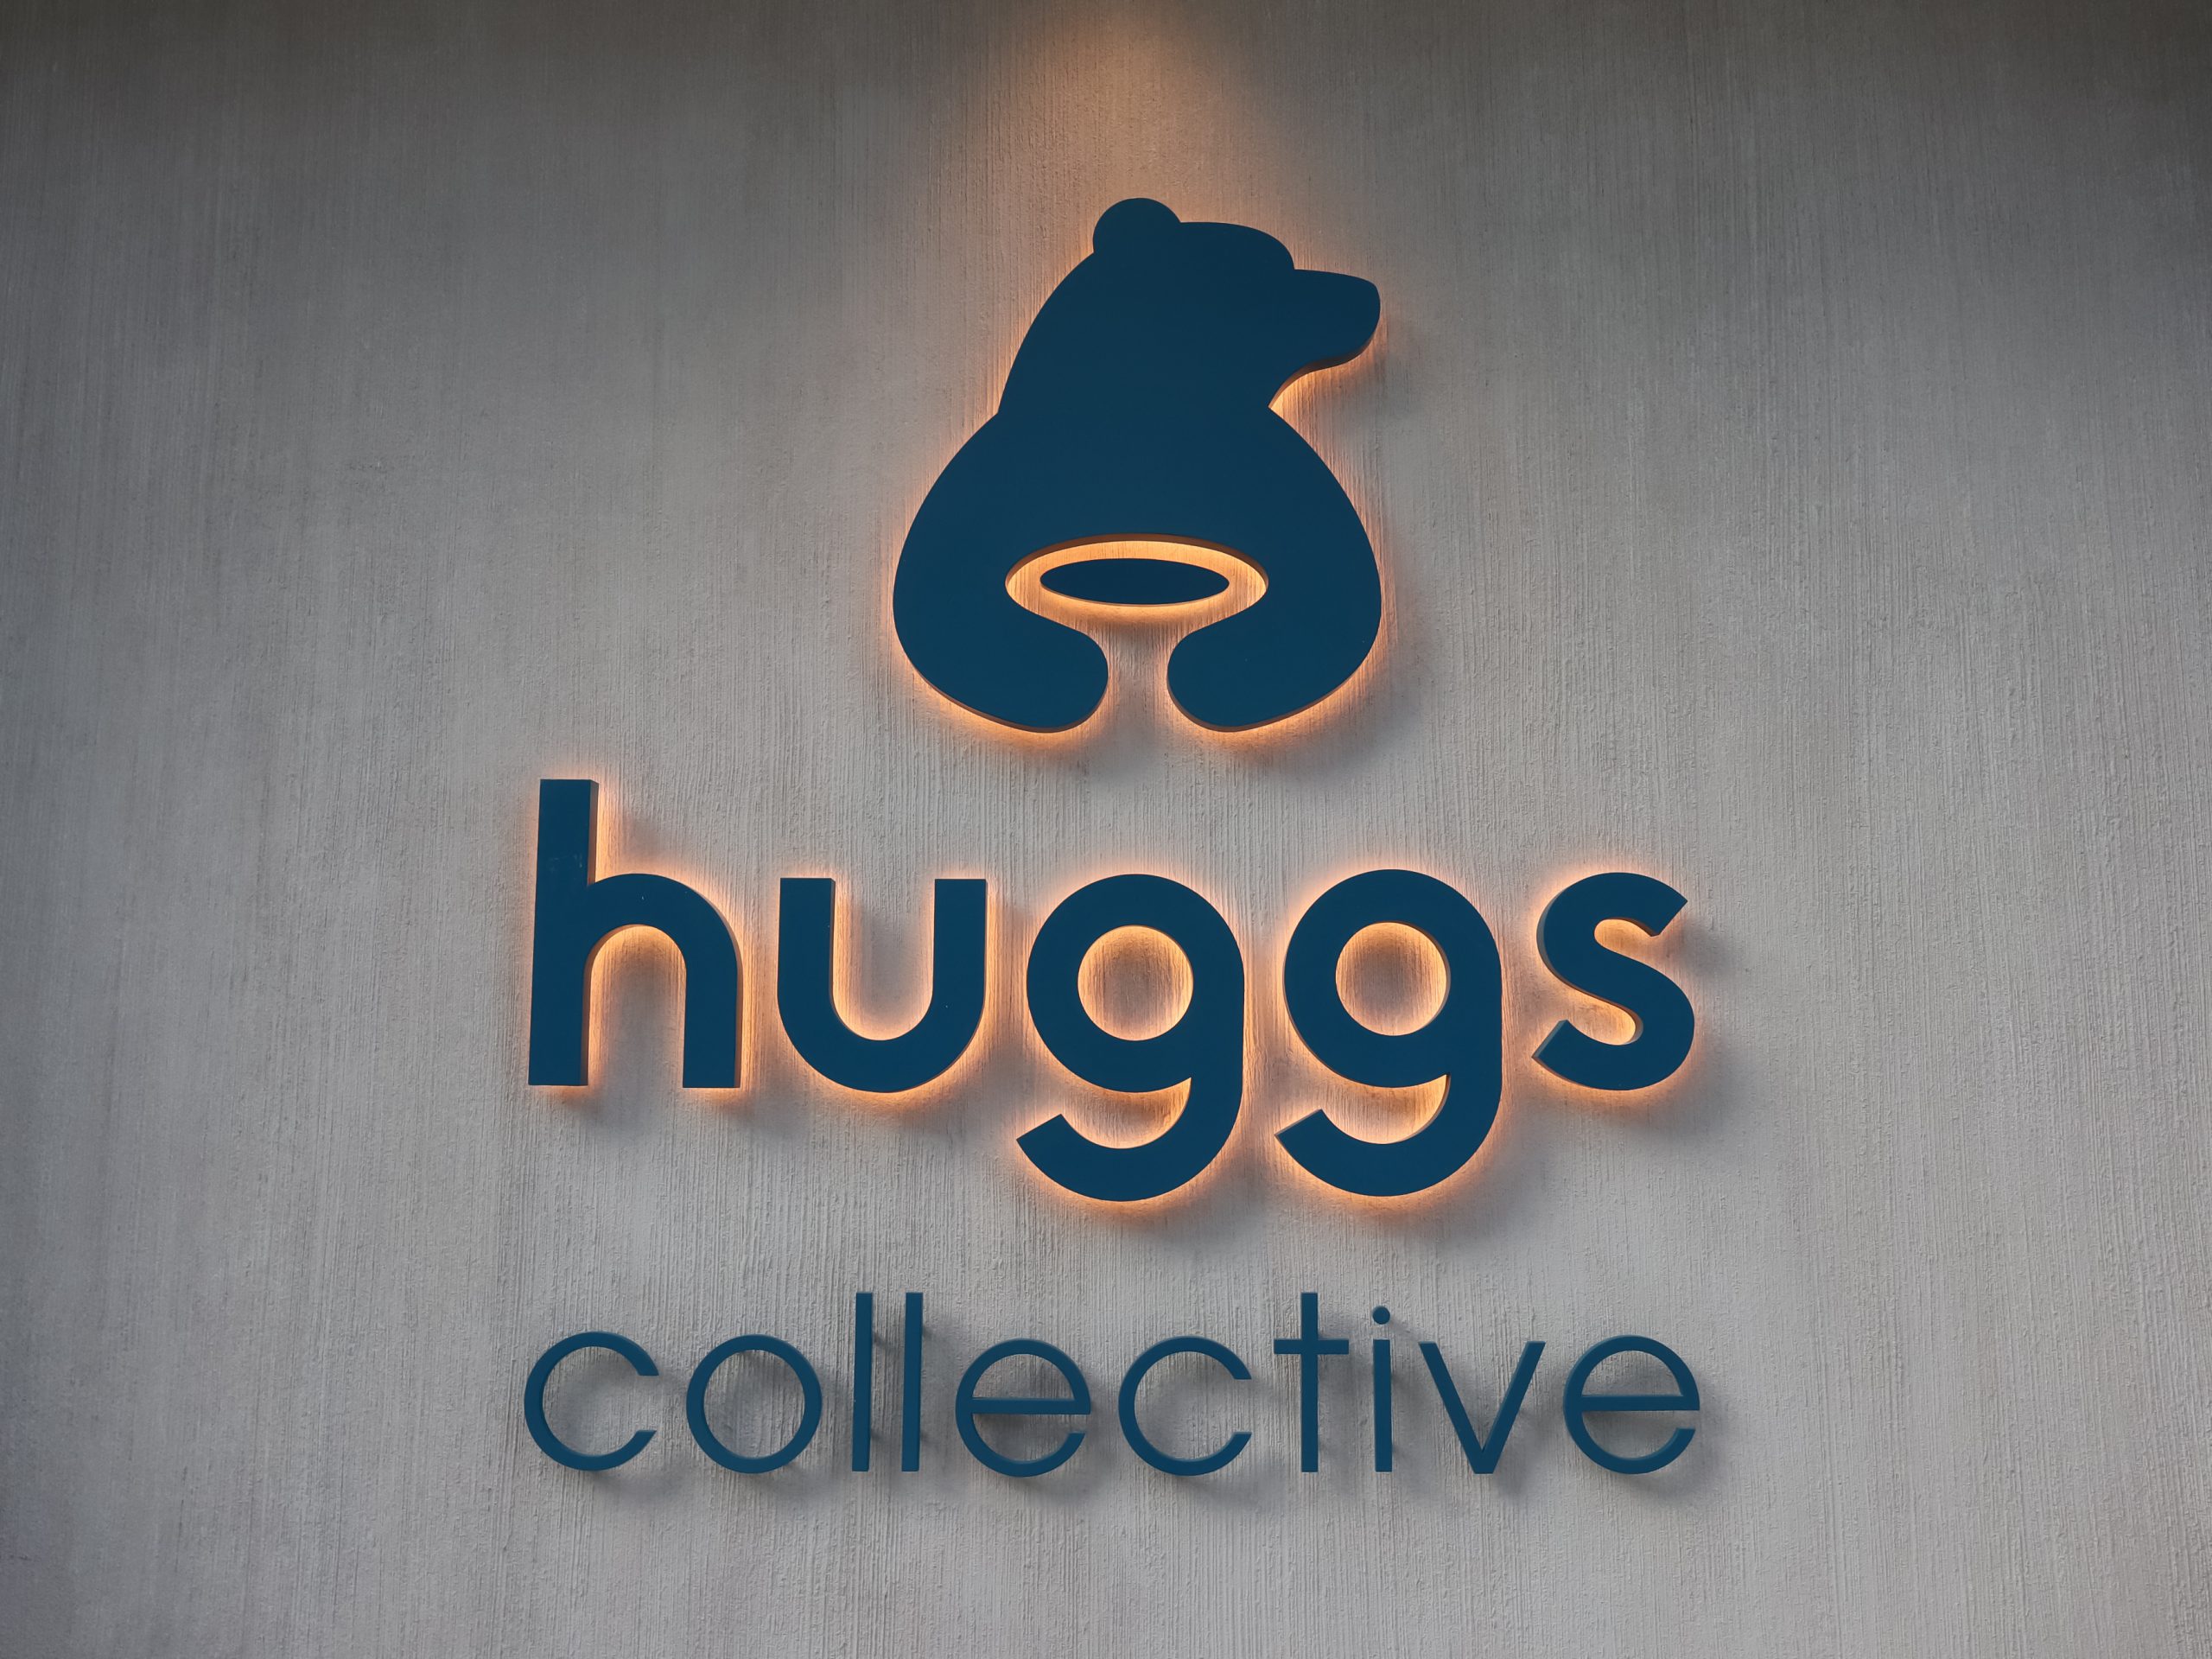 claire_three-new-cafes-tanjong-pagar-huggs-maxwell-collective-1.1-logo